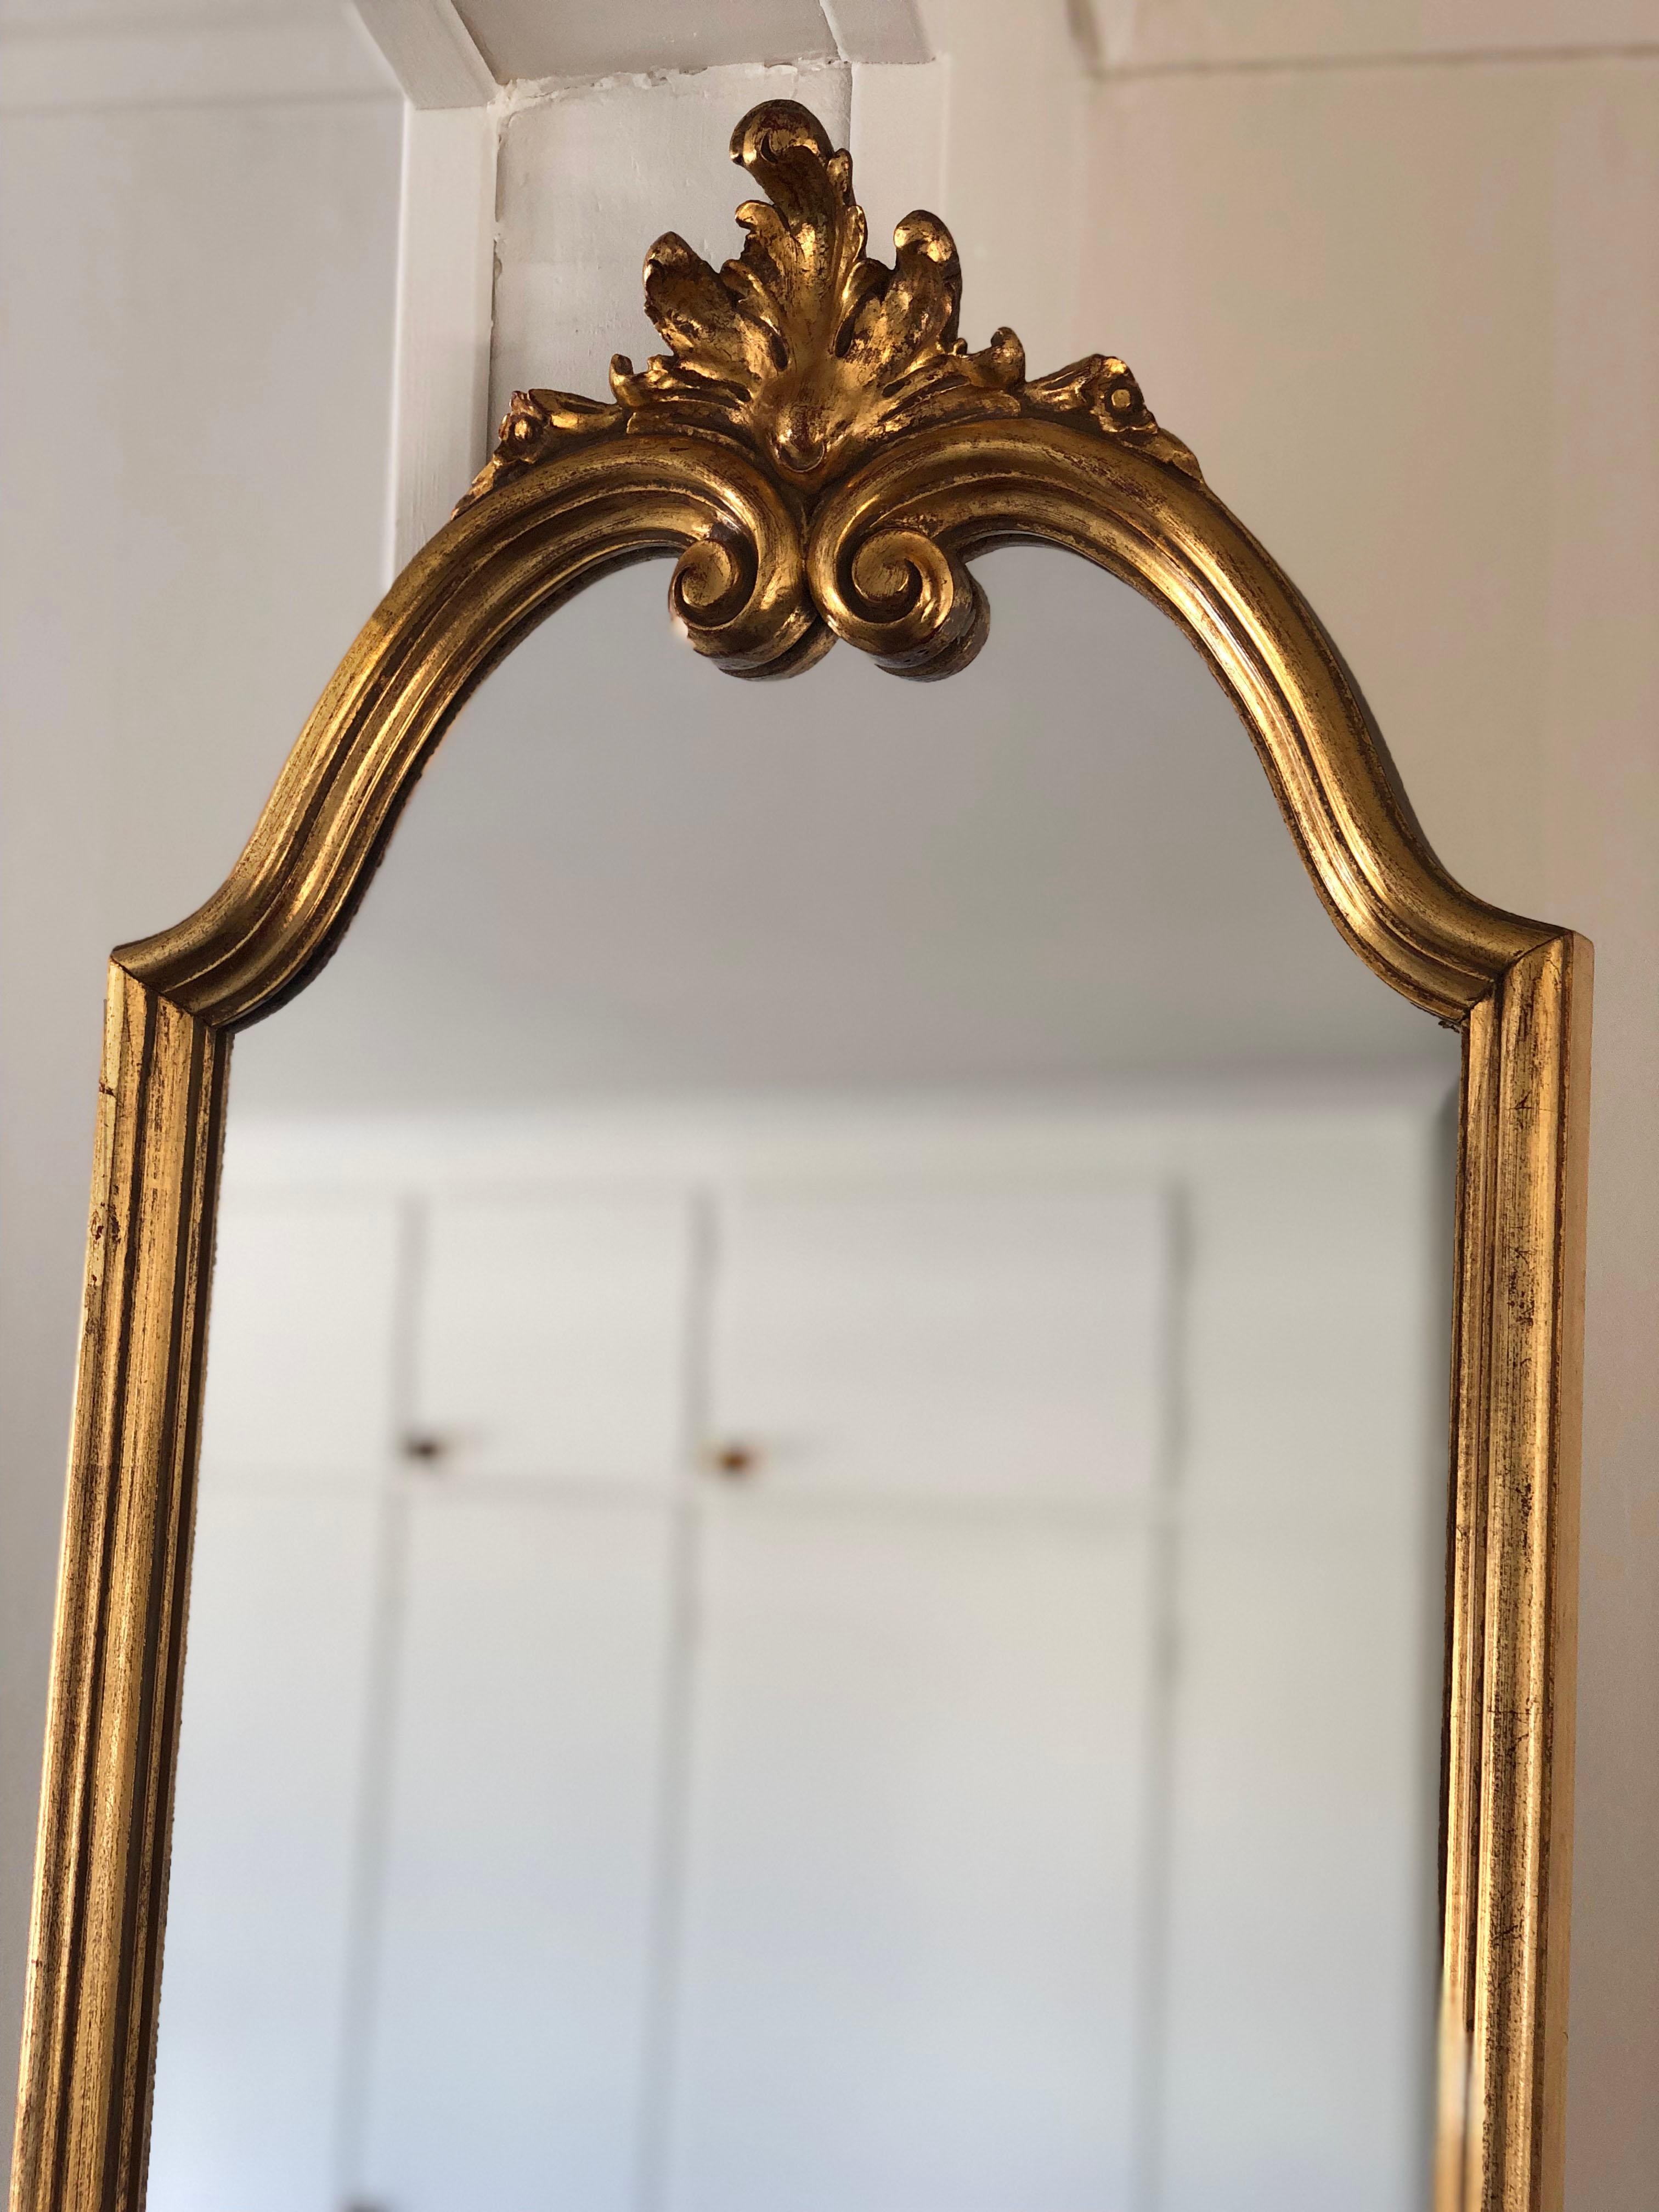 Beautiful vintage full length mirror in gold from Deknudt mirrors from Belgium. Small Cut mirrors are placed in the golden frame. Deknudt is known for its quality mirrors from the 70/ 80s.

Object: Mirror
Designer: Deknudt
Style: Vintage, Hollywood